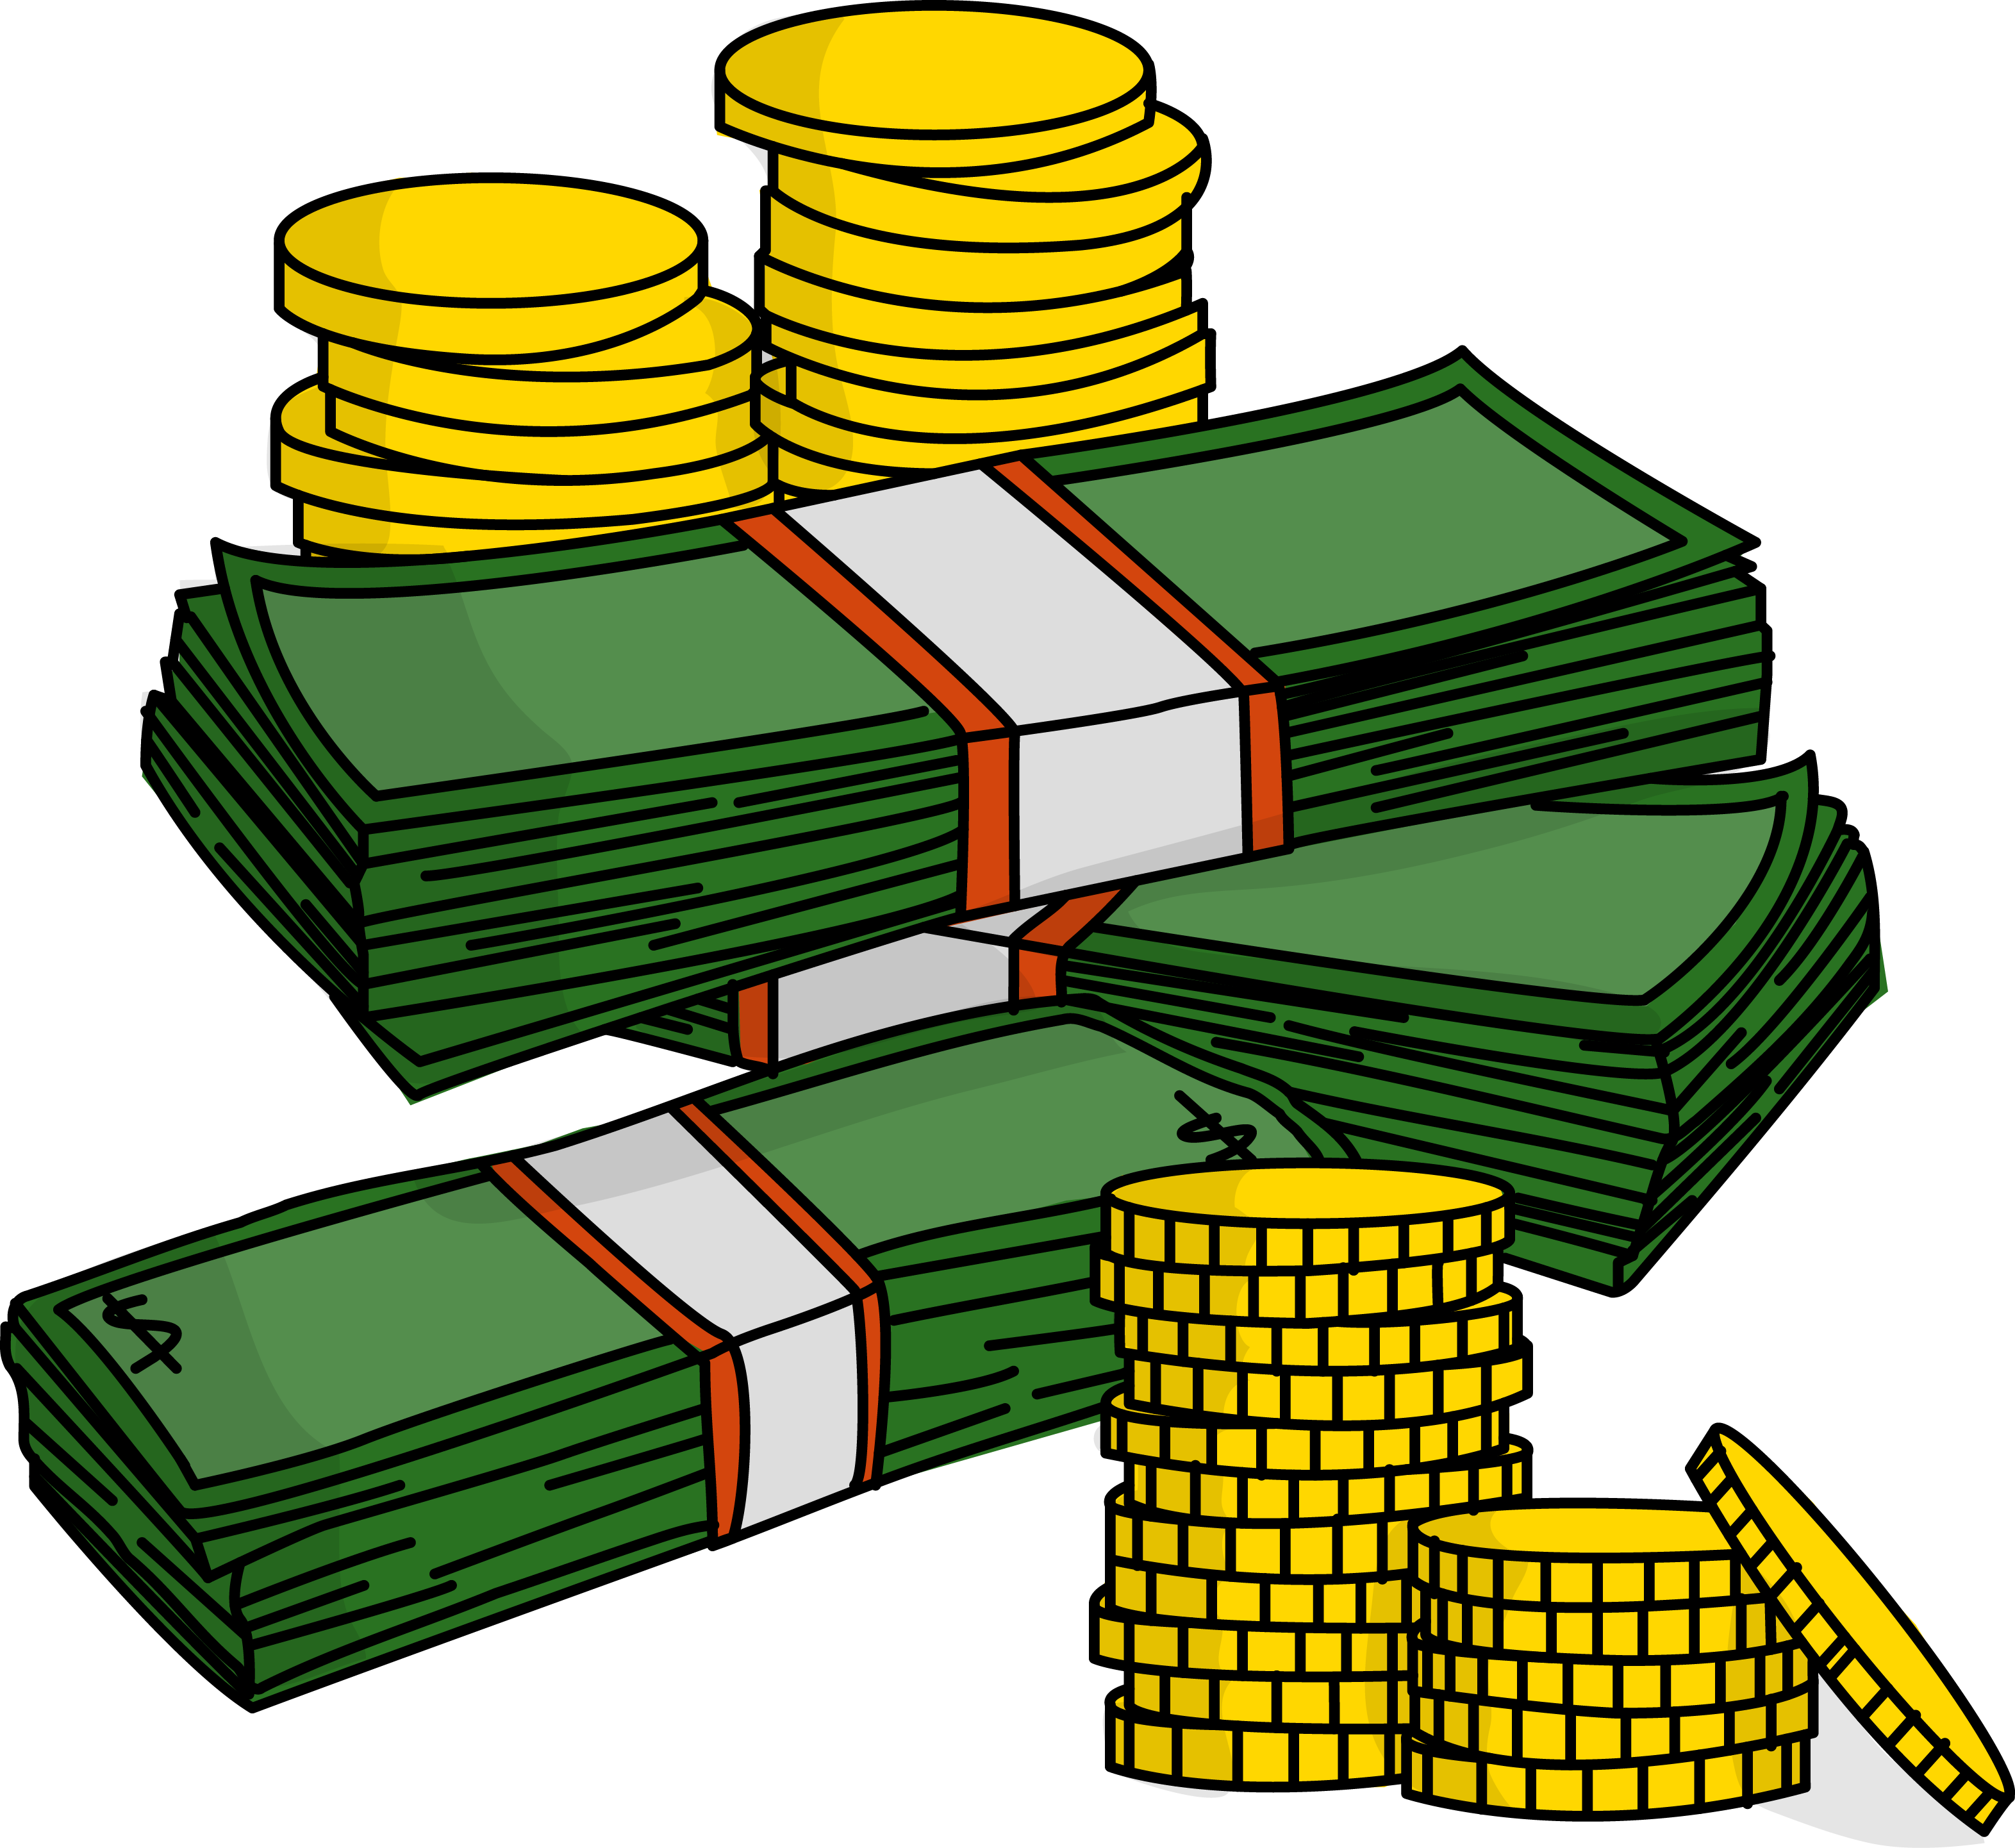 ... Free Stacks Of Money With Coins High Resolution Clip Art | All ..